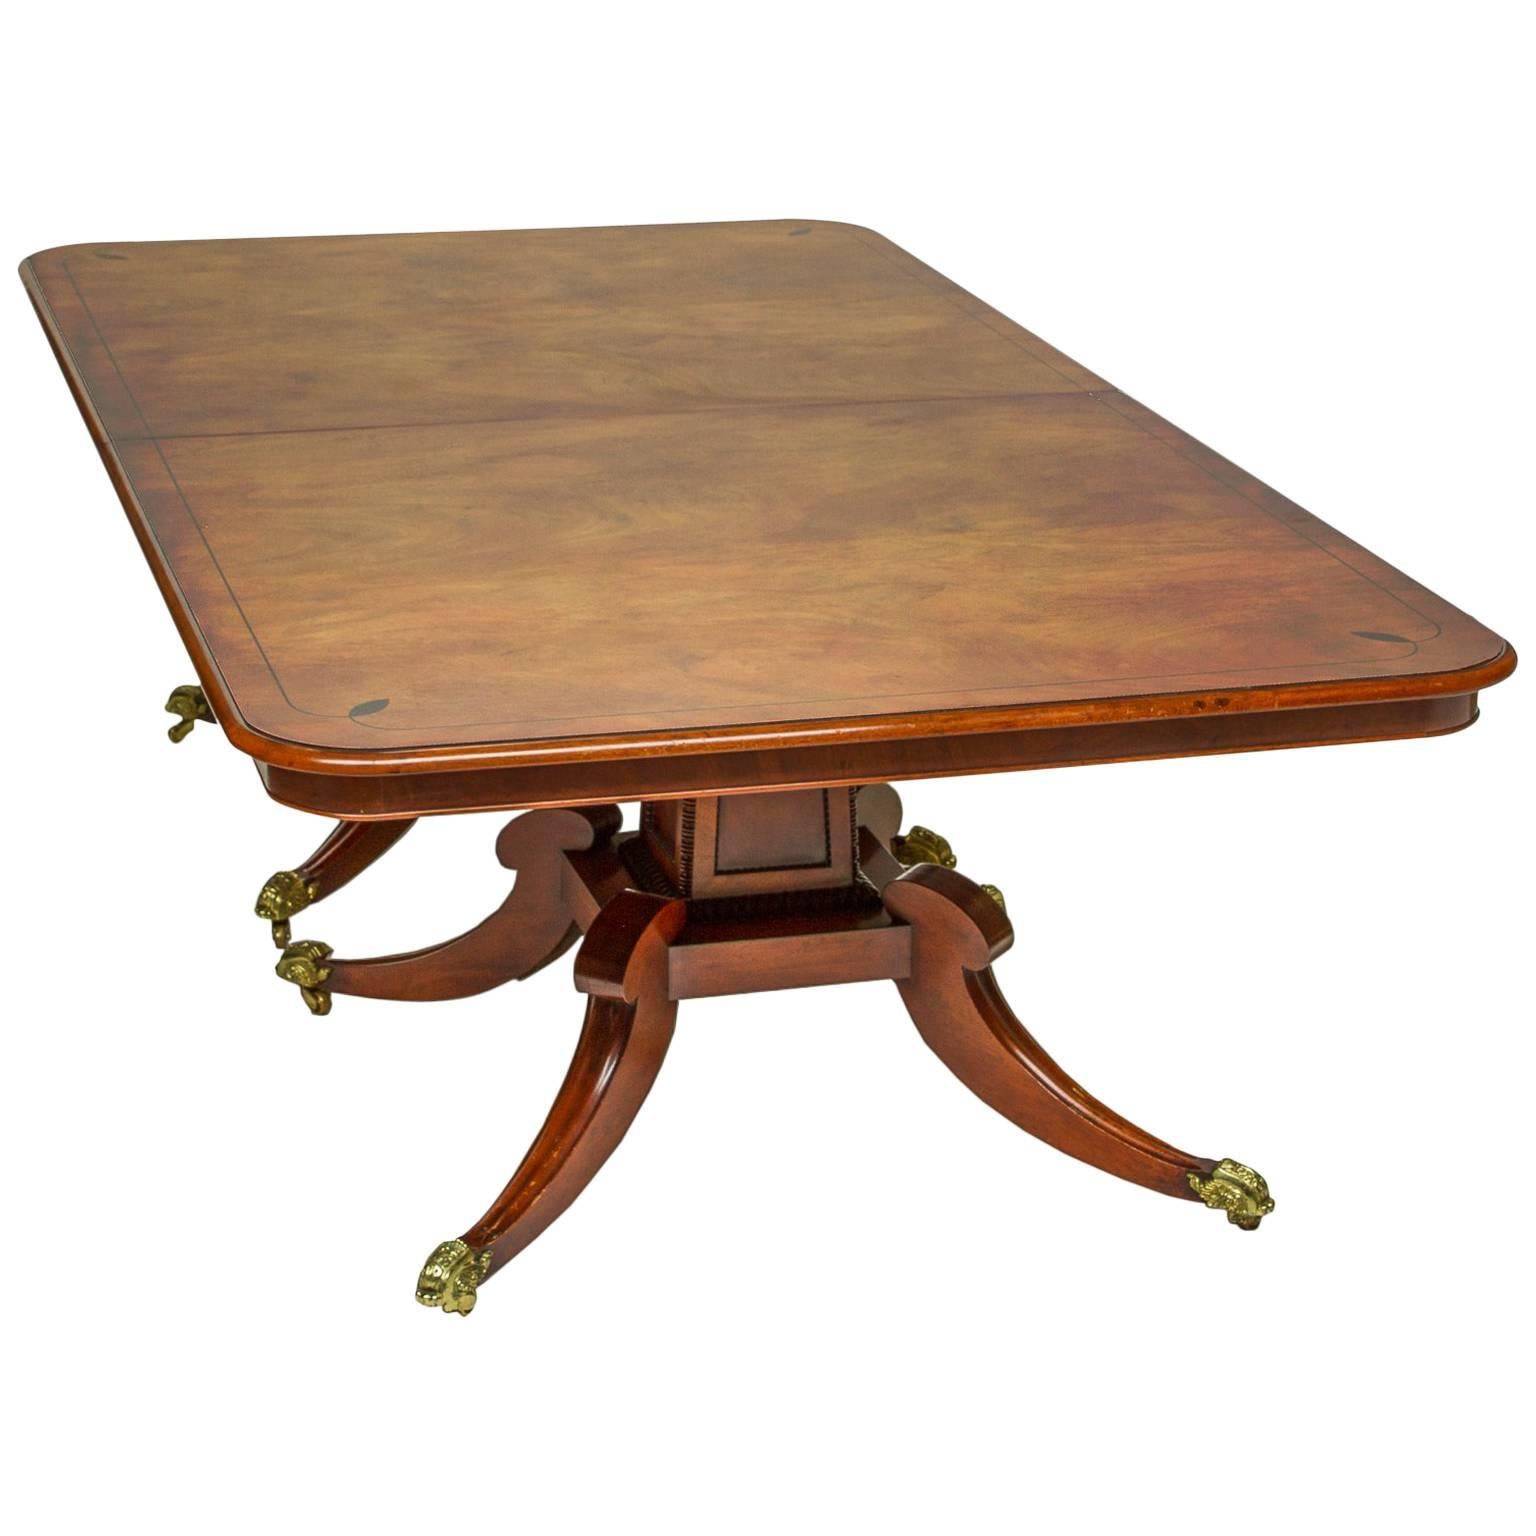 English Regency Dining Table with Two Leaves